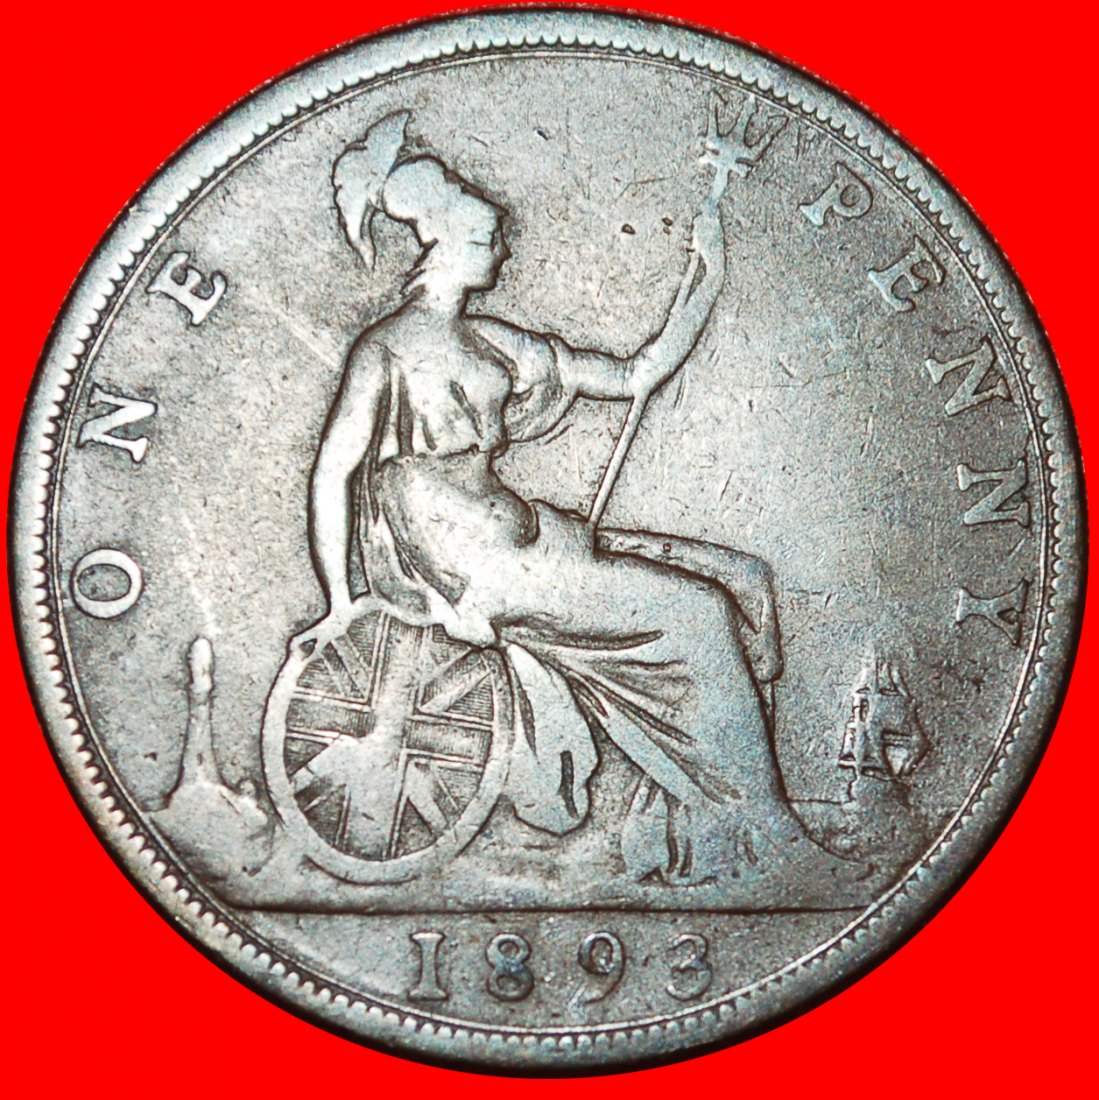  * 2 SOLD MISTRESS OF SEAS: GREAT BRITAIN ★PENNY 1893★SHIP★VICTORIA 1837-1901★LOW START ★ NO RESERVE!   